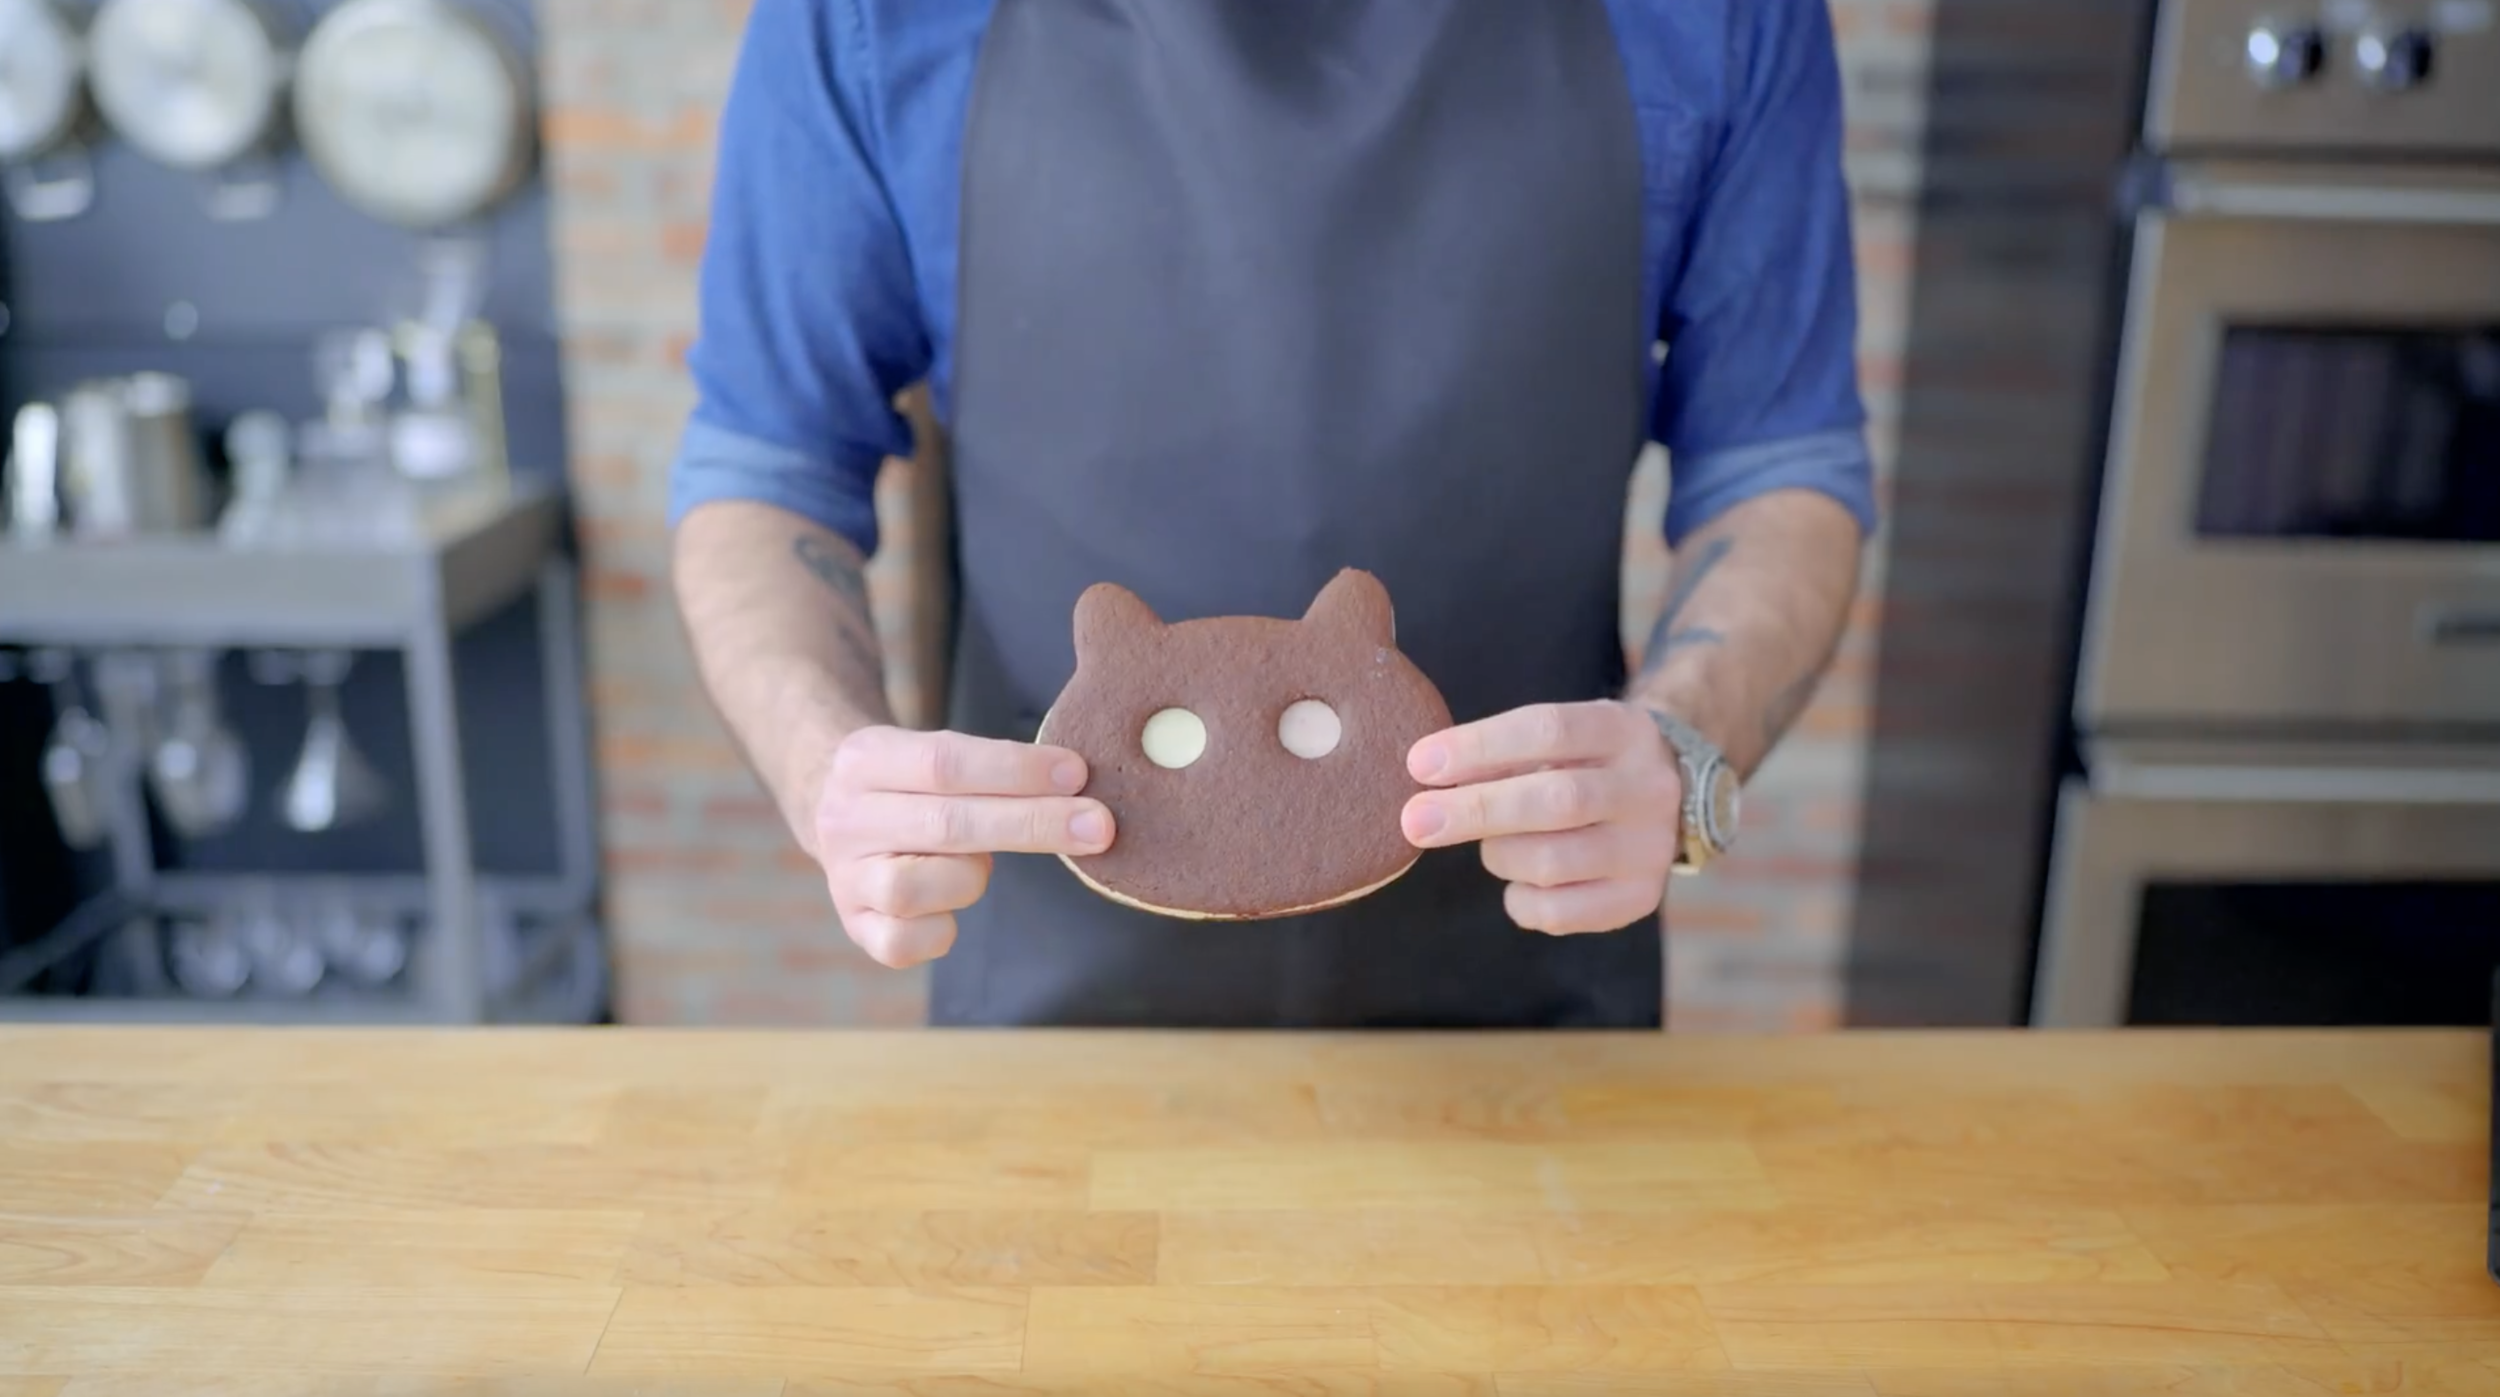 THE ULTIMATE COOKIE — Basics With Babish